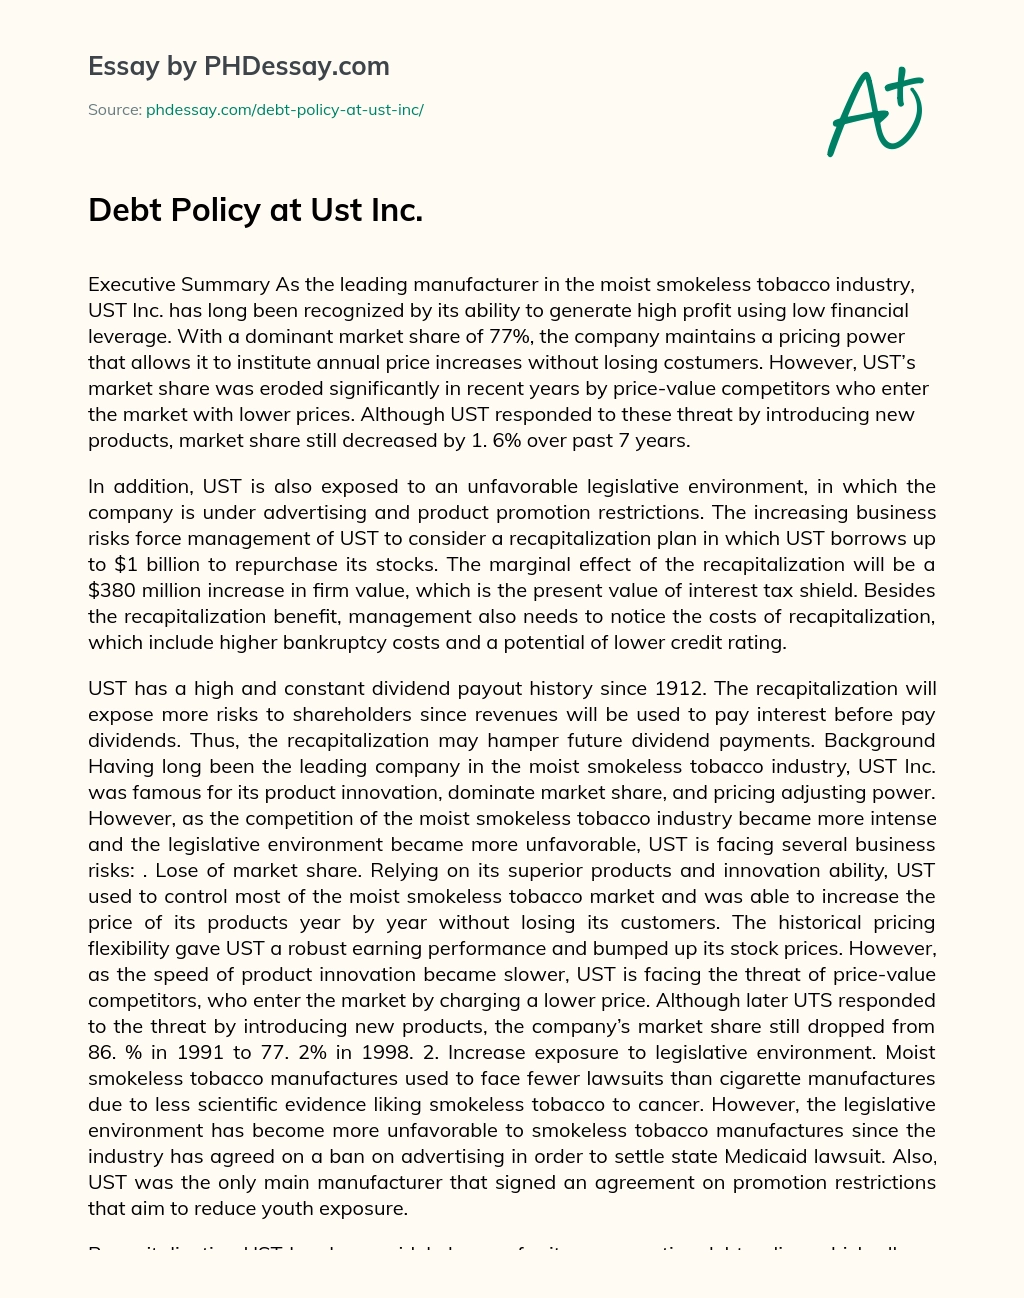 Debt Policy at Ust Inc. essay